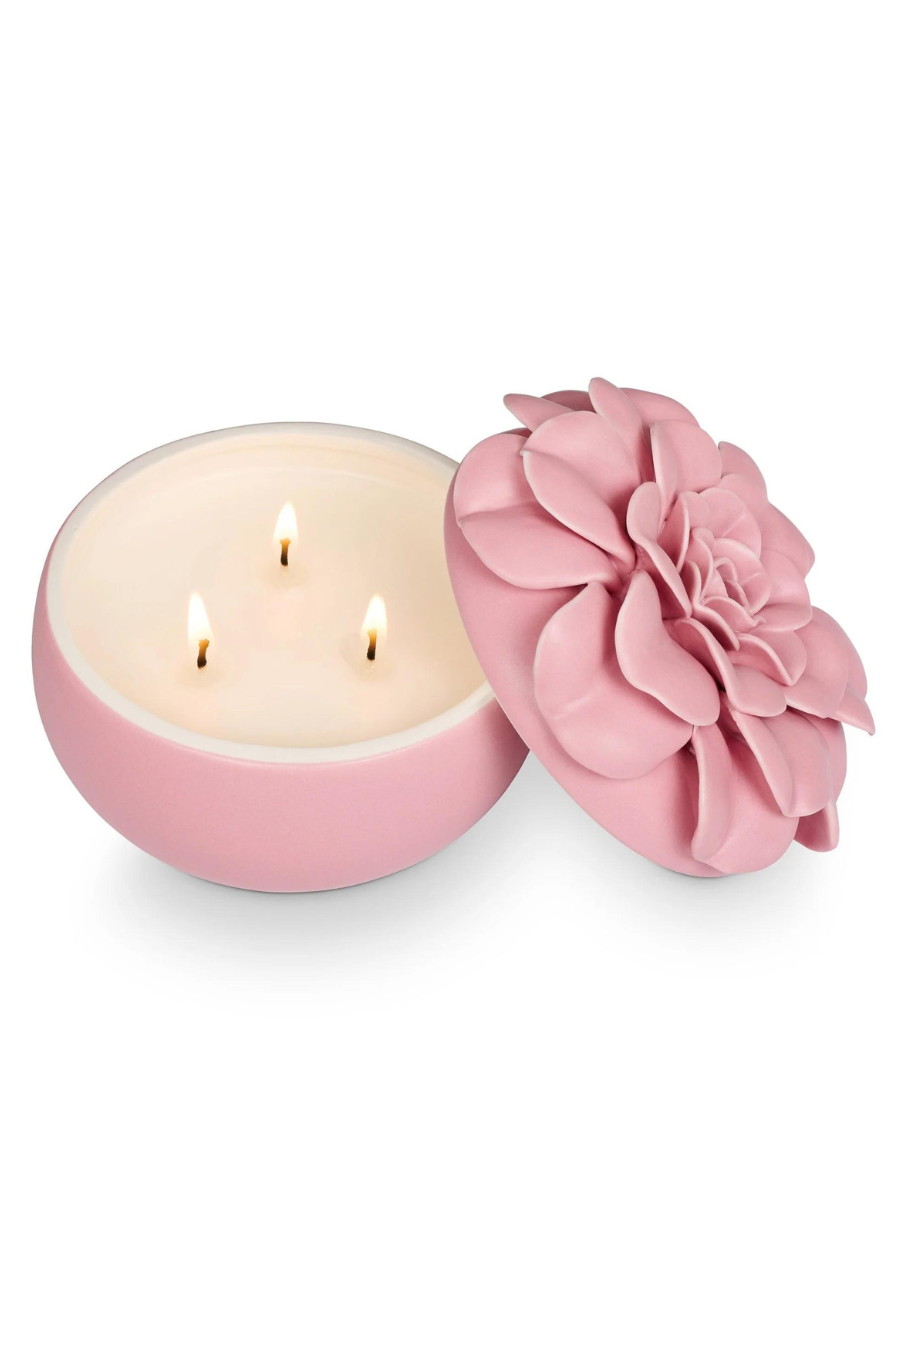 Pink Pepper Fruit Ceramic Flower Candle LOCAL PICK UP ONLY